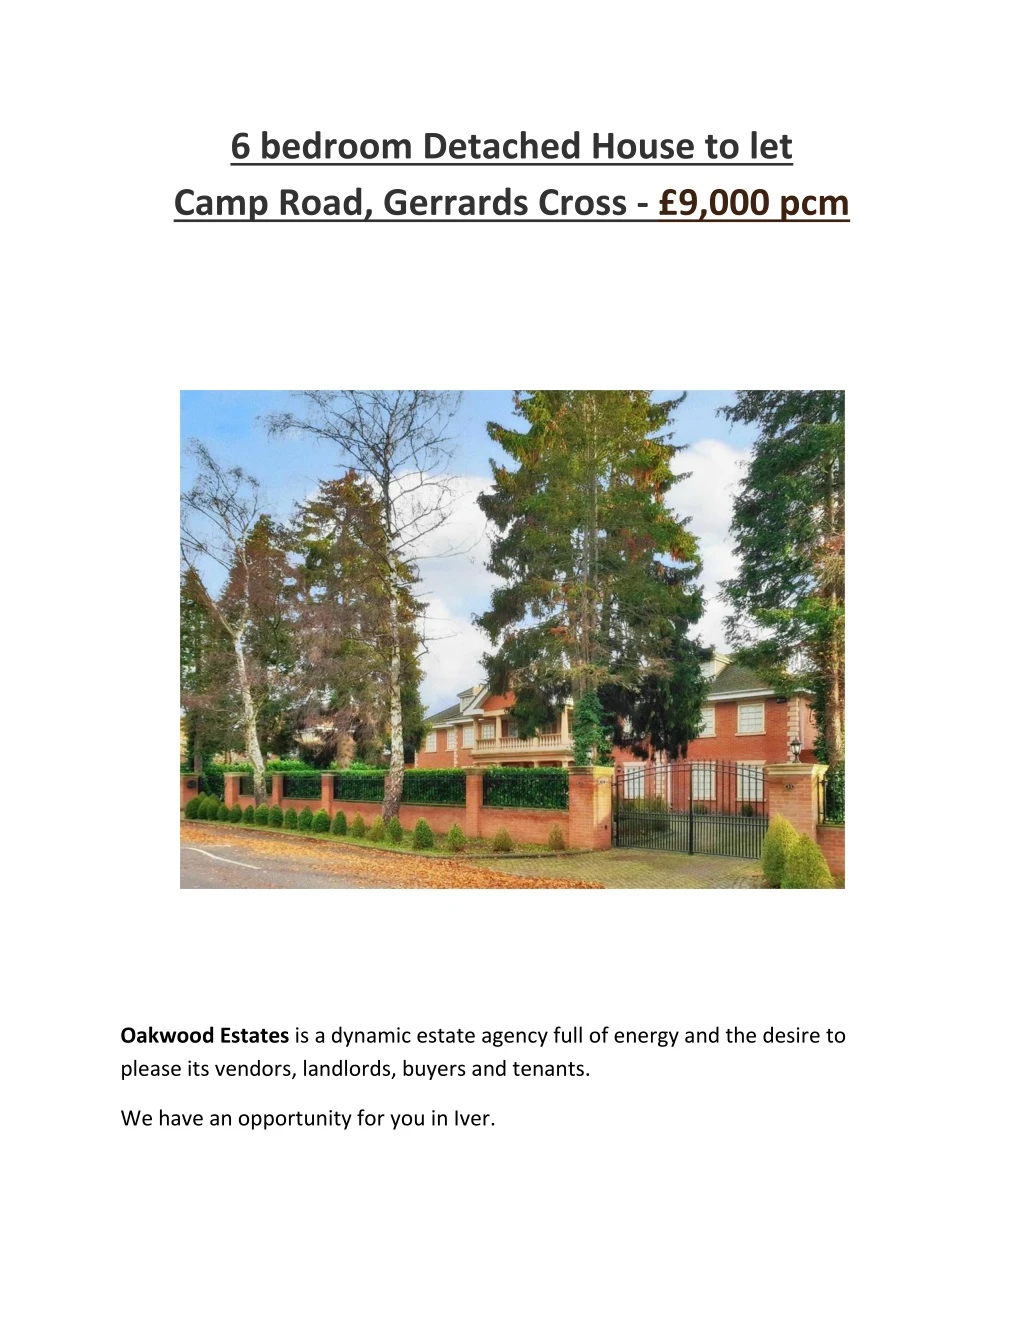 6 bedroom detached house to let camp road